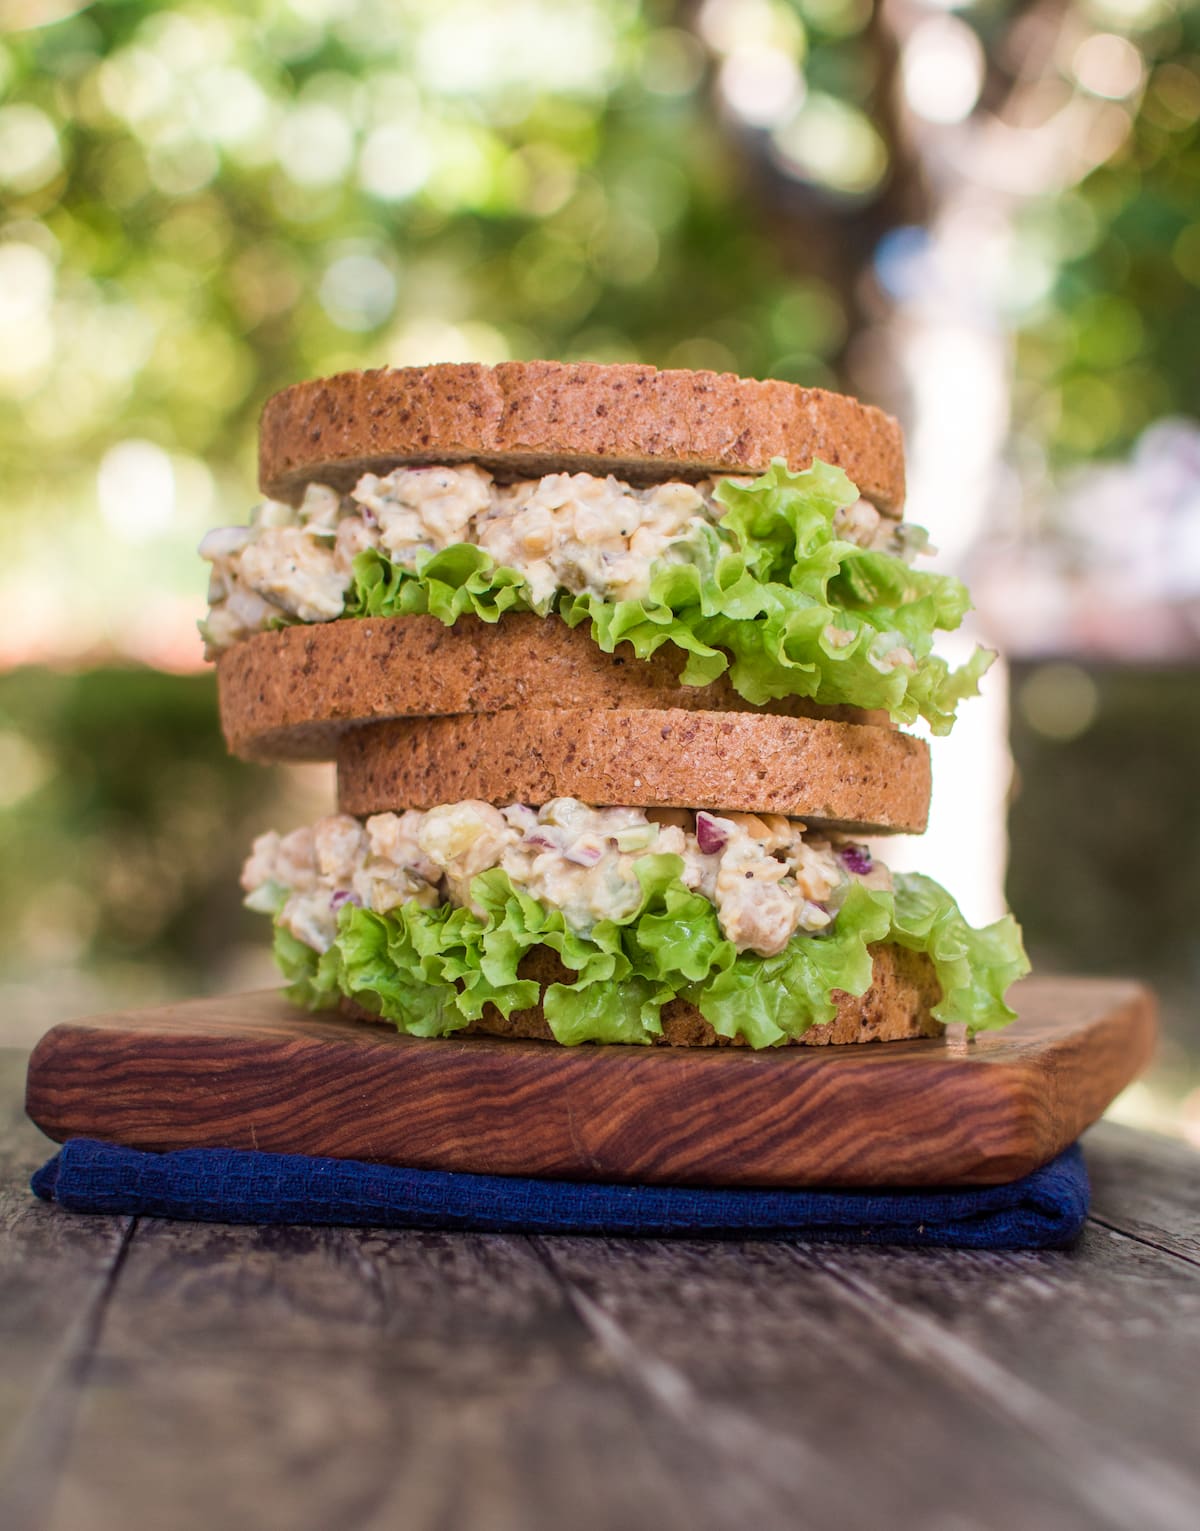 Vegan chicken salad served in a sandwich with lettuce.